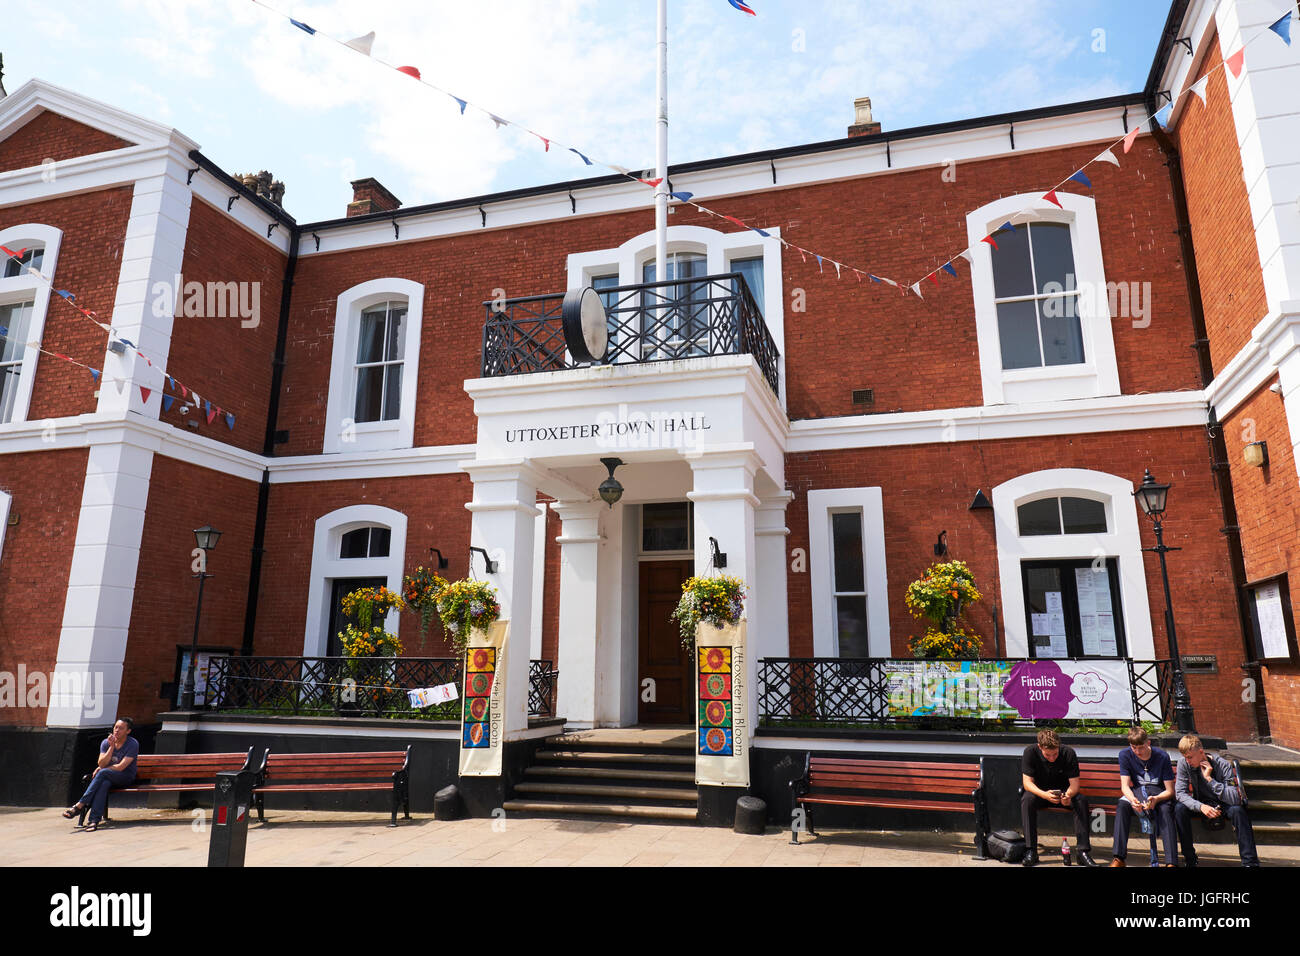 Town Hall High Street, Uttoxeter, Staffordshire, Regno Unito Foto Stock